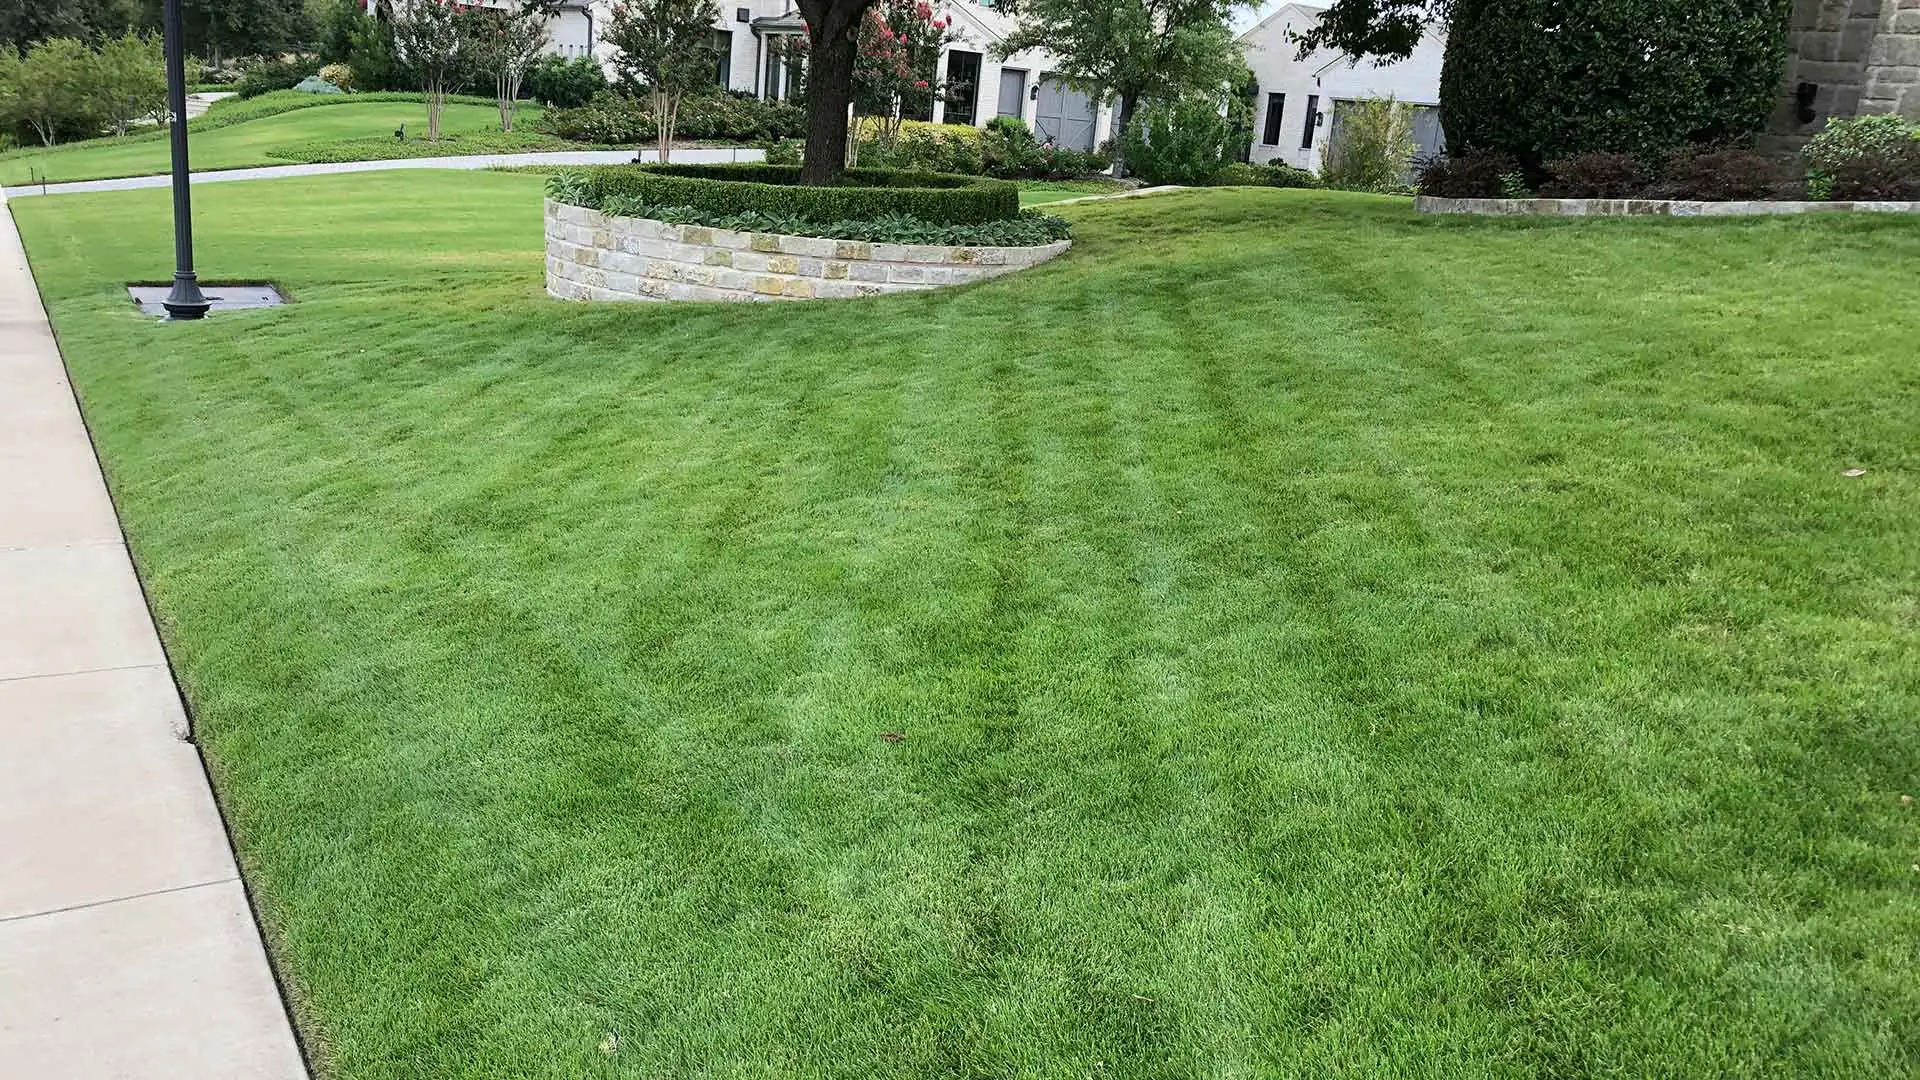 Mowed lawn with a retaining wall in the middle of property in Lucas, TX.